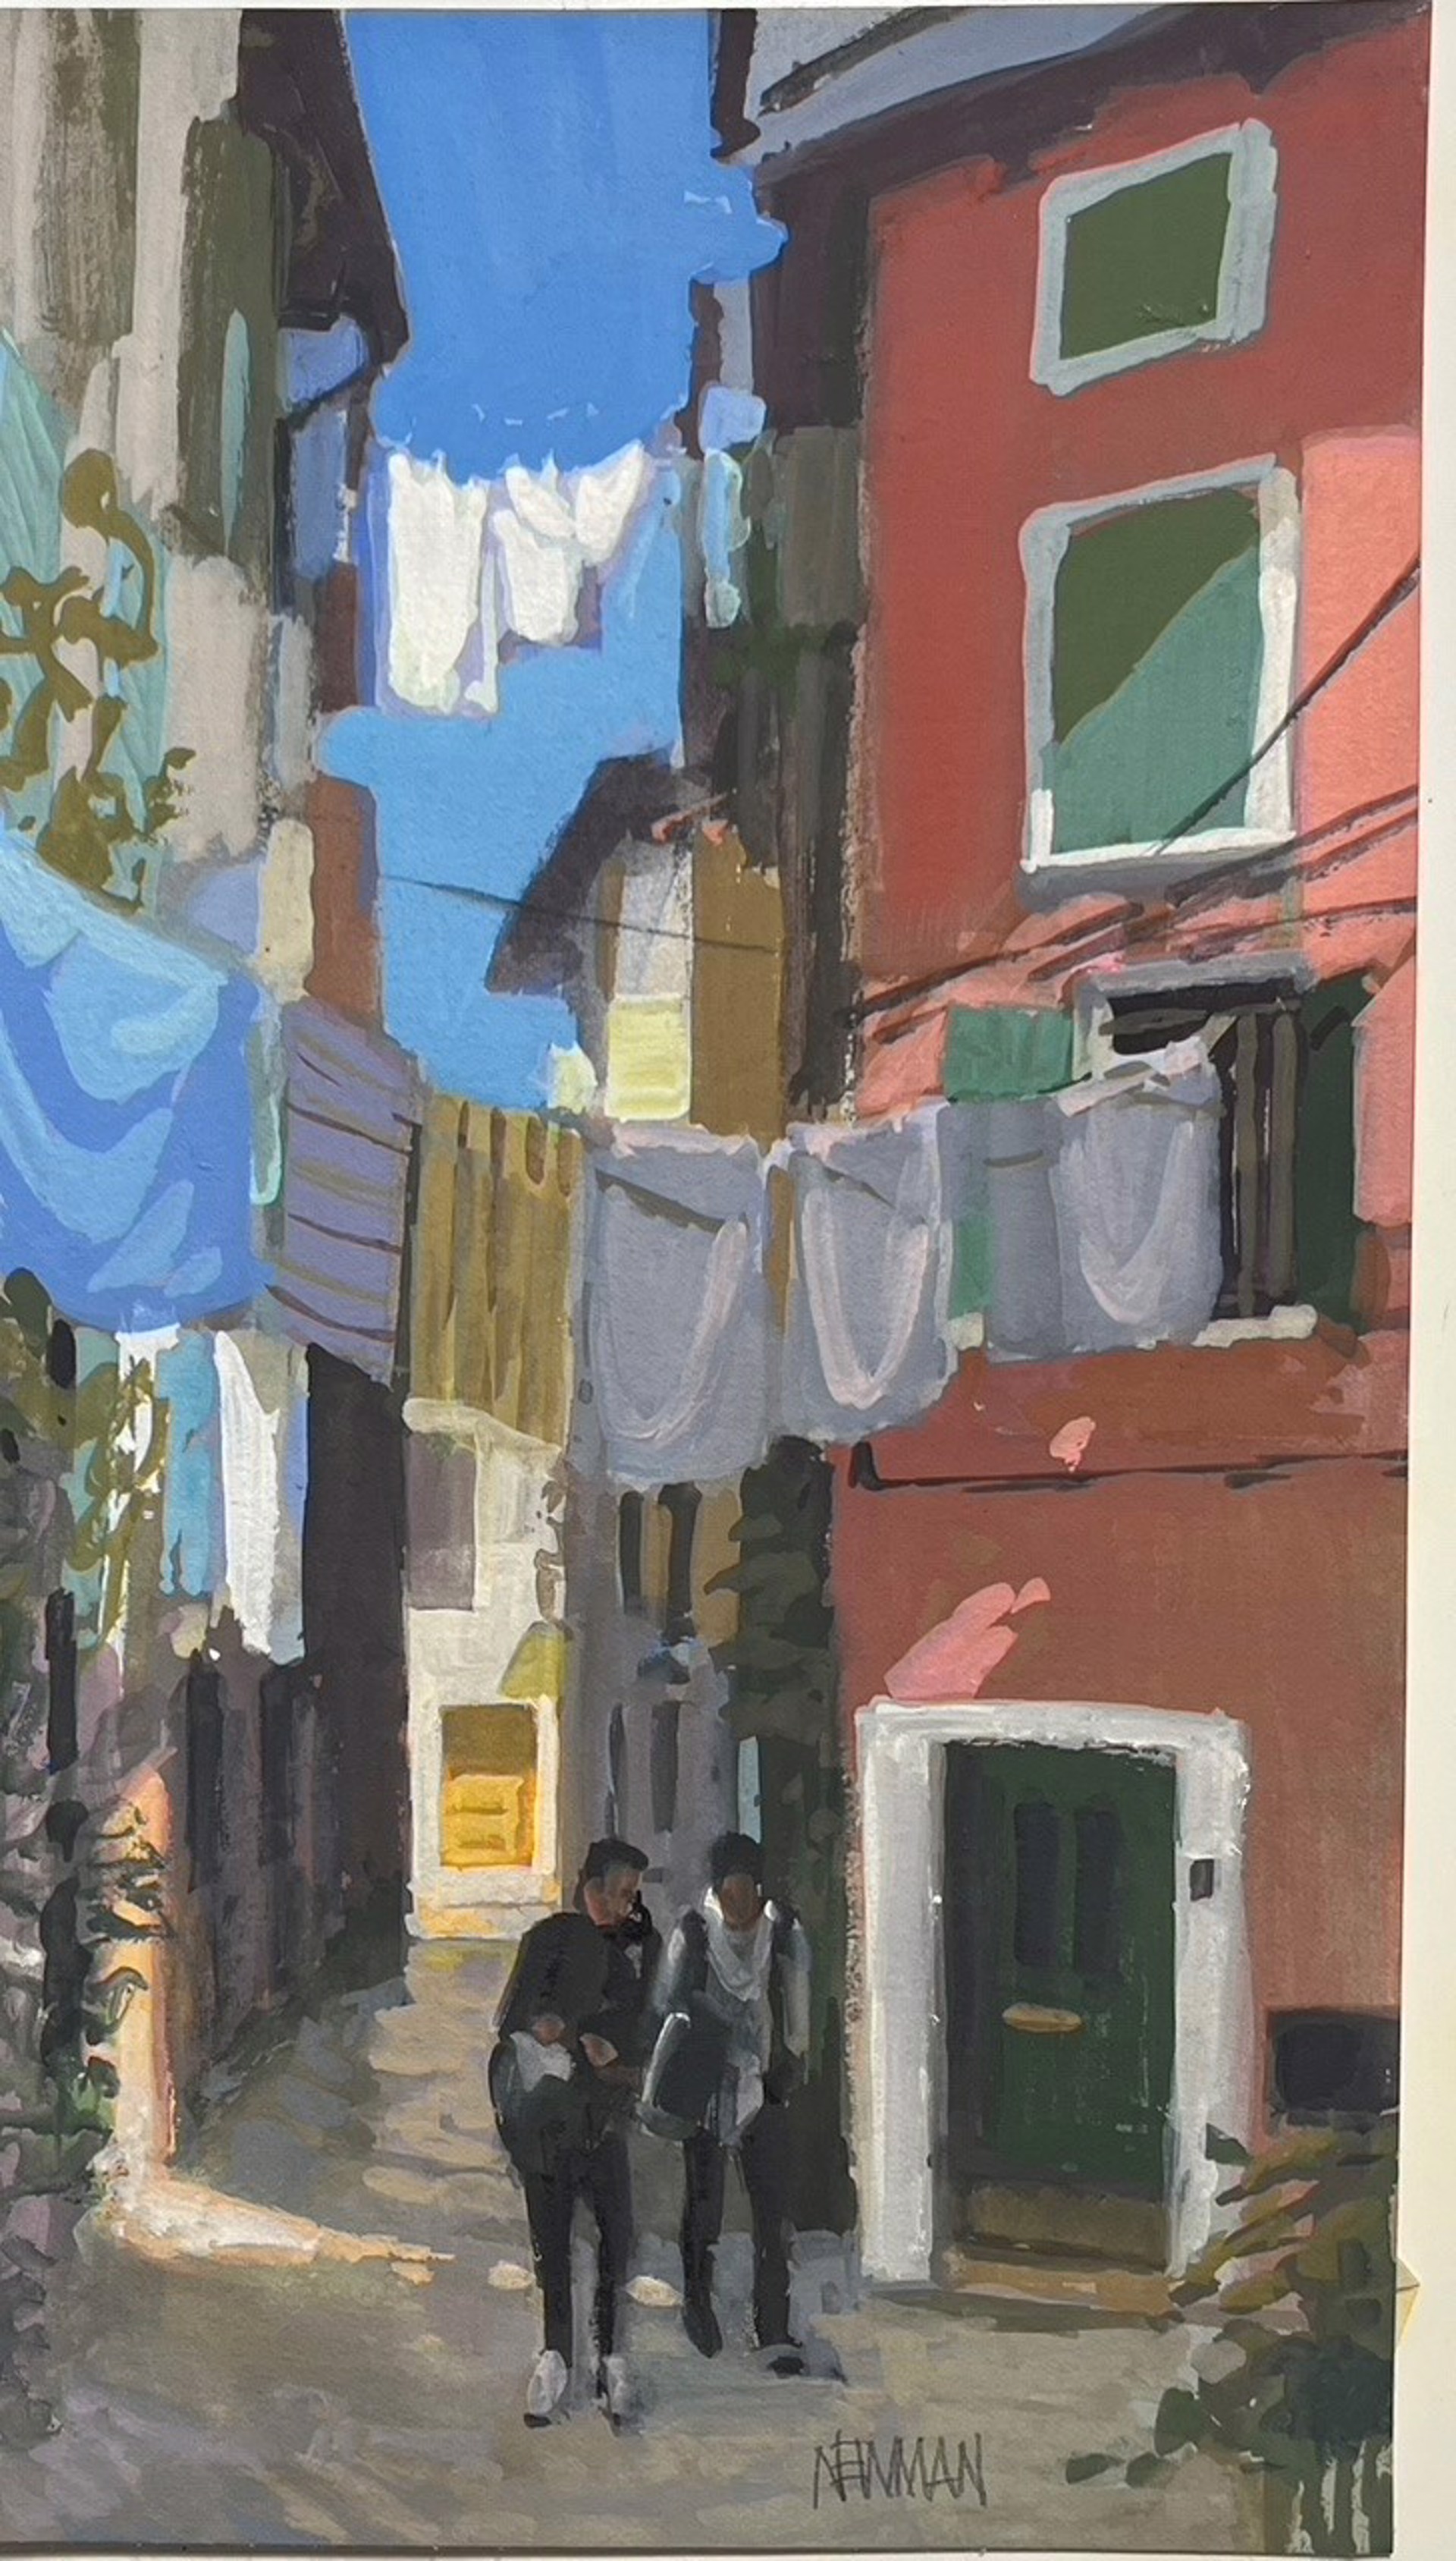 Laundry Day, Rovinj by Kathleen Newman